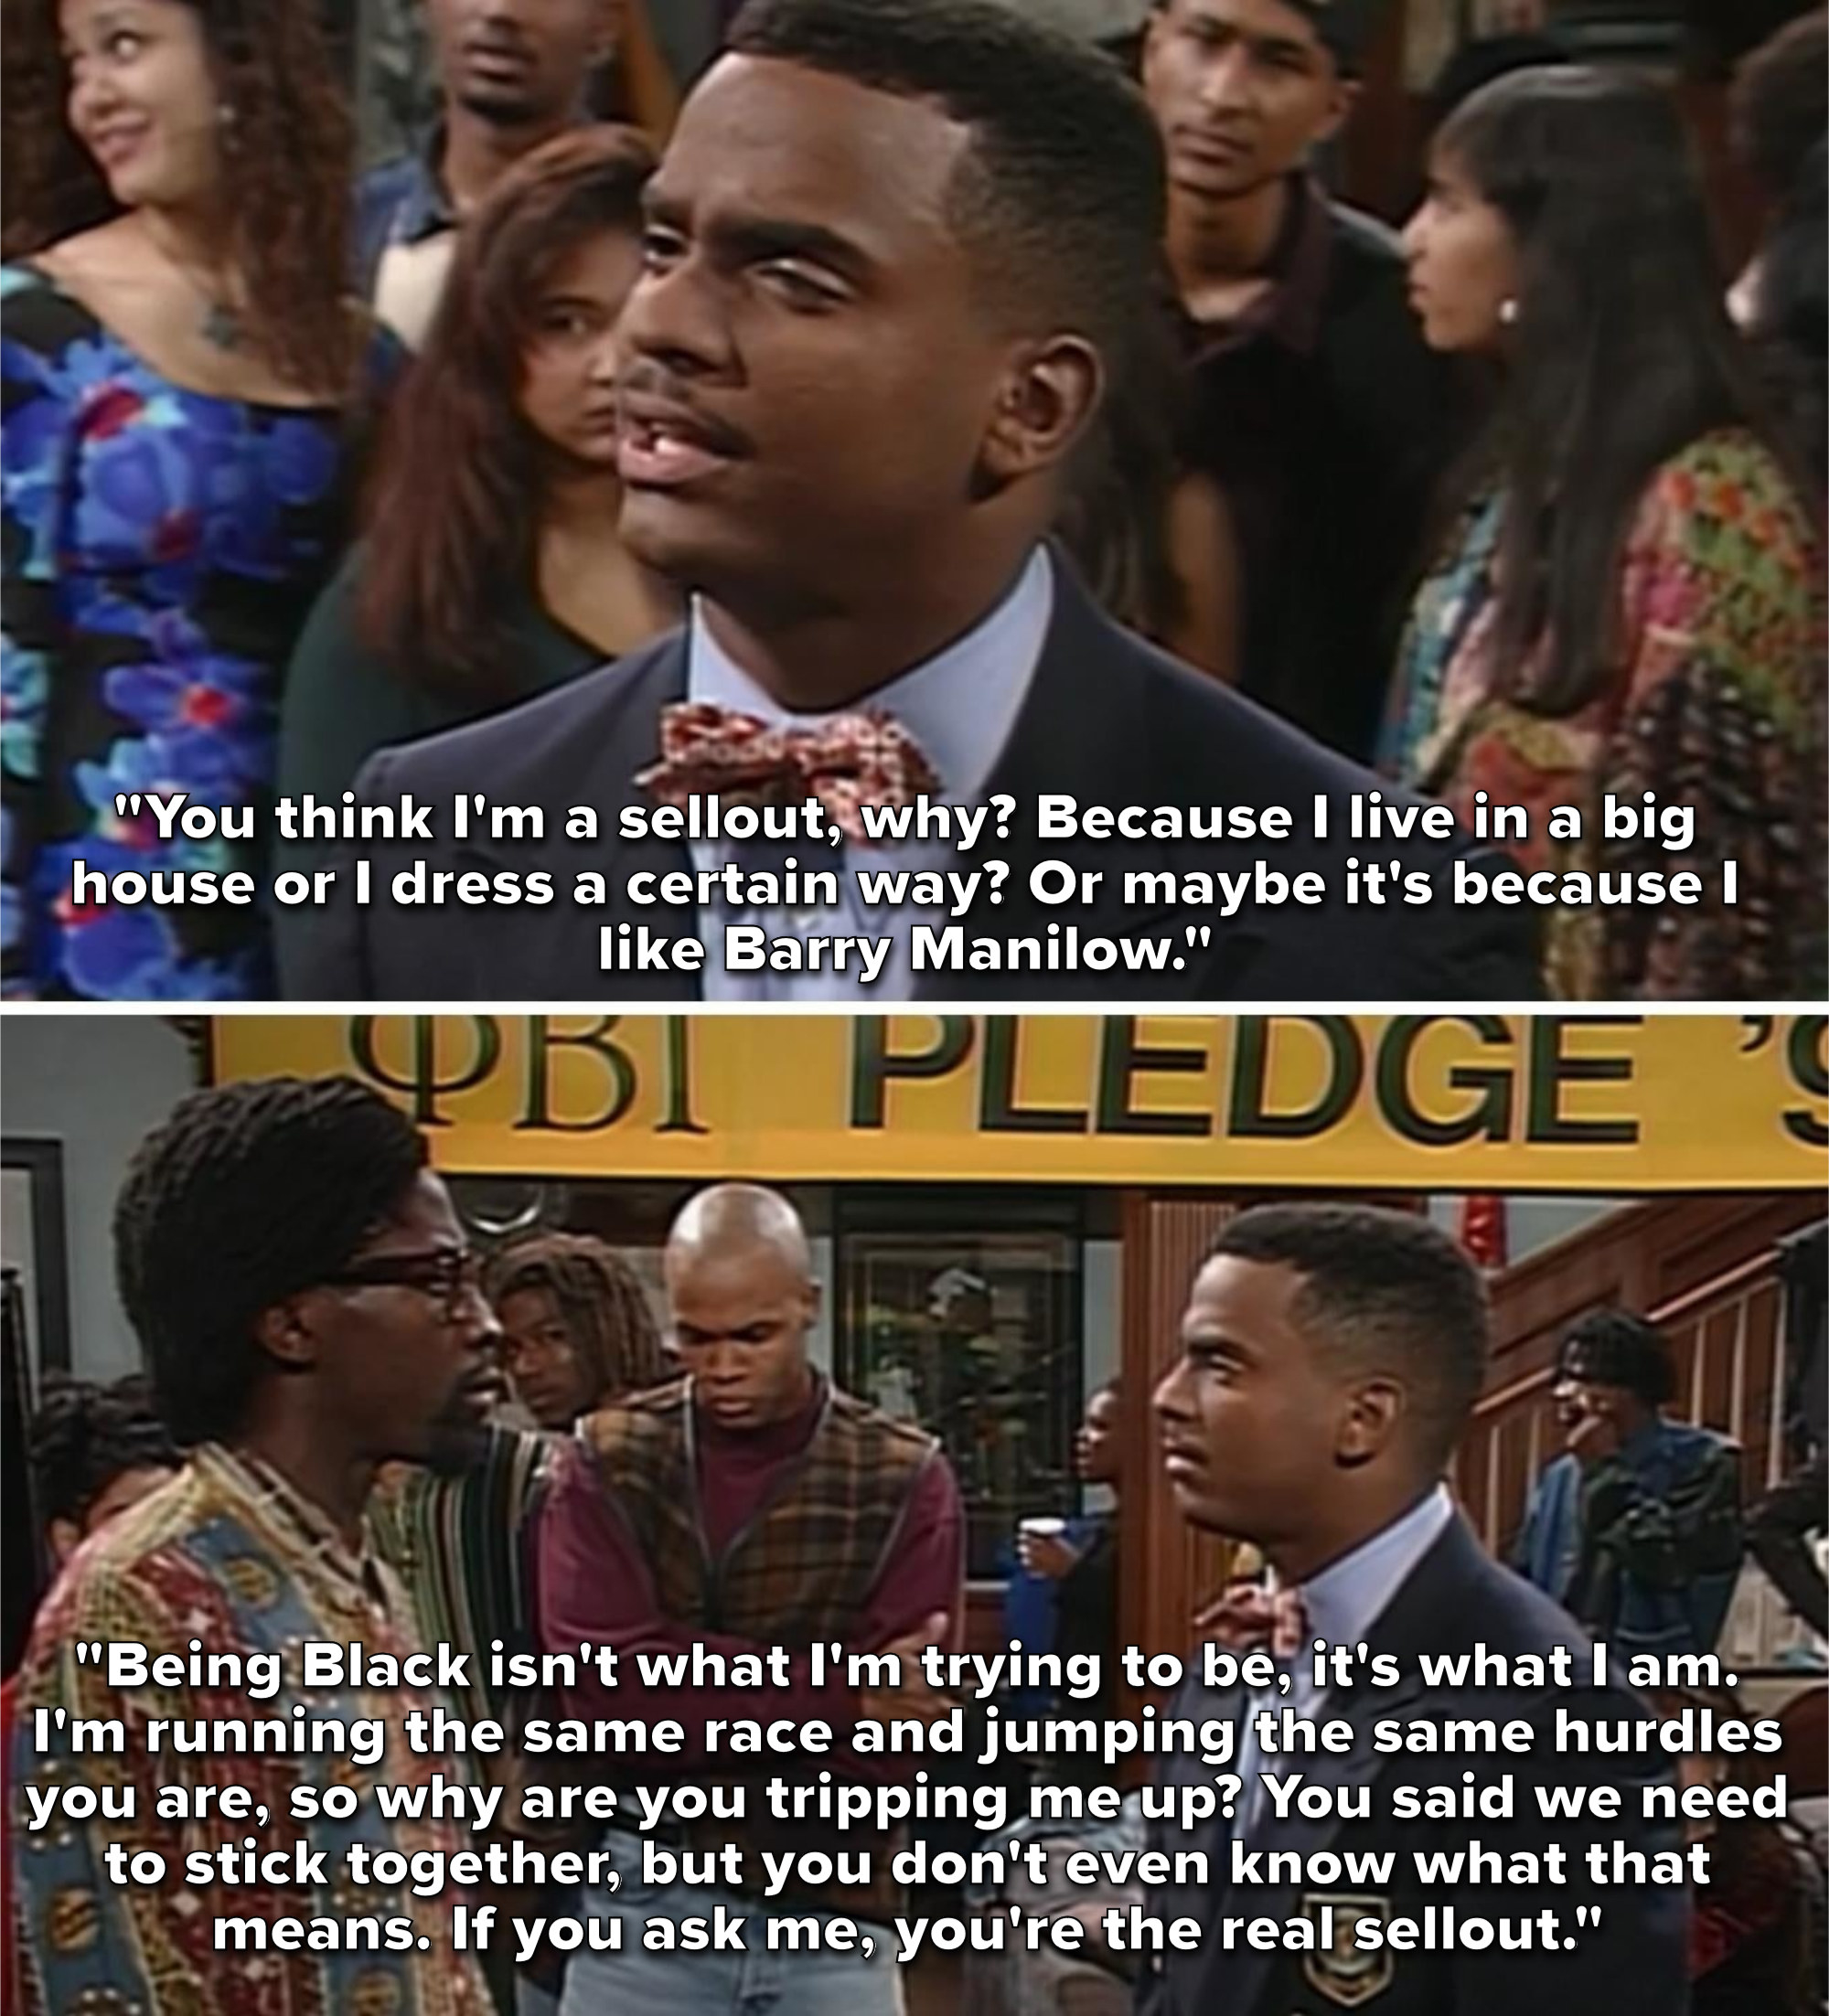 Carlton shutting the pledge leader down and calling him a sellout